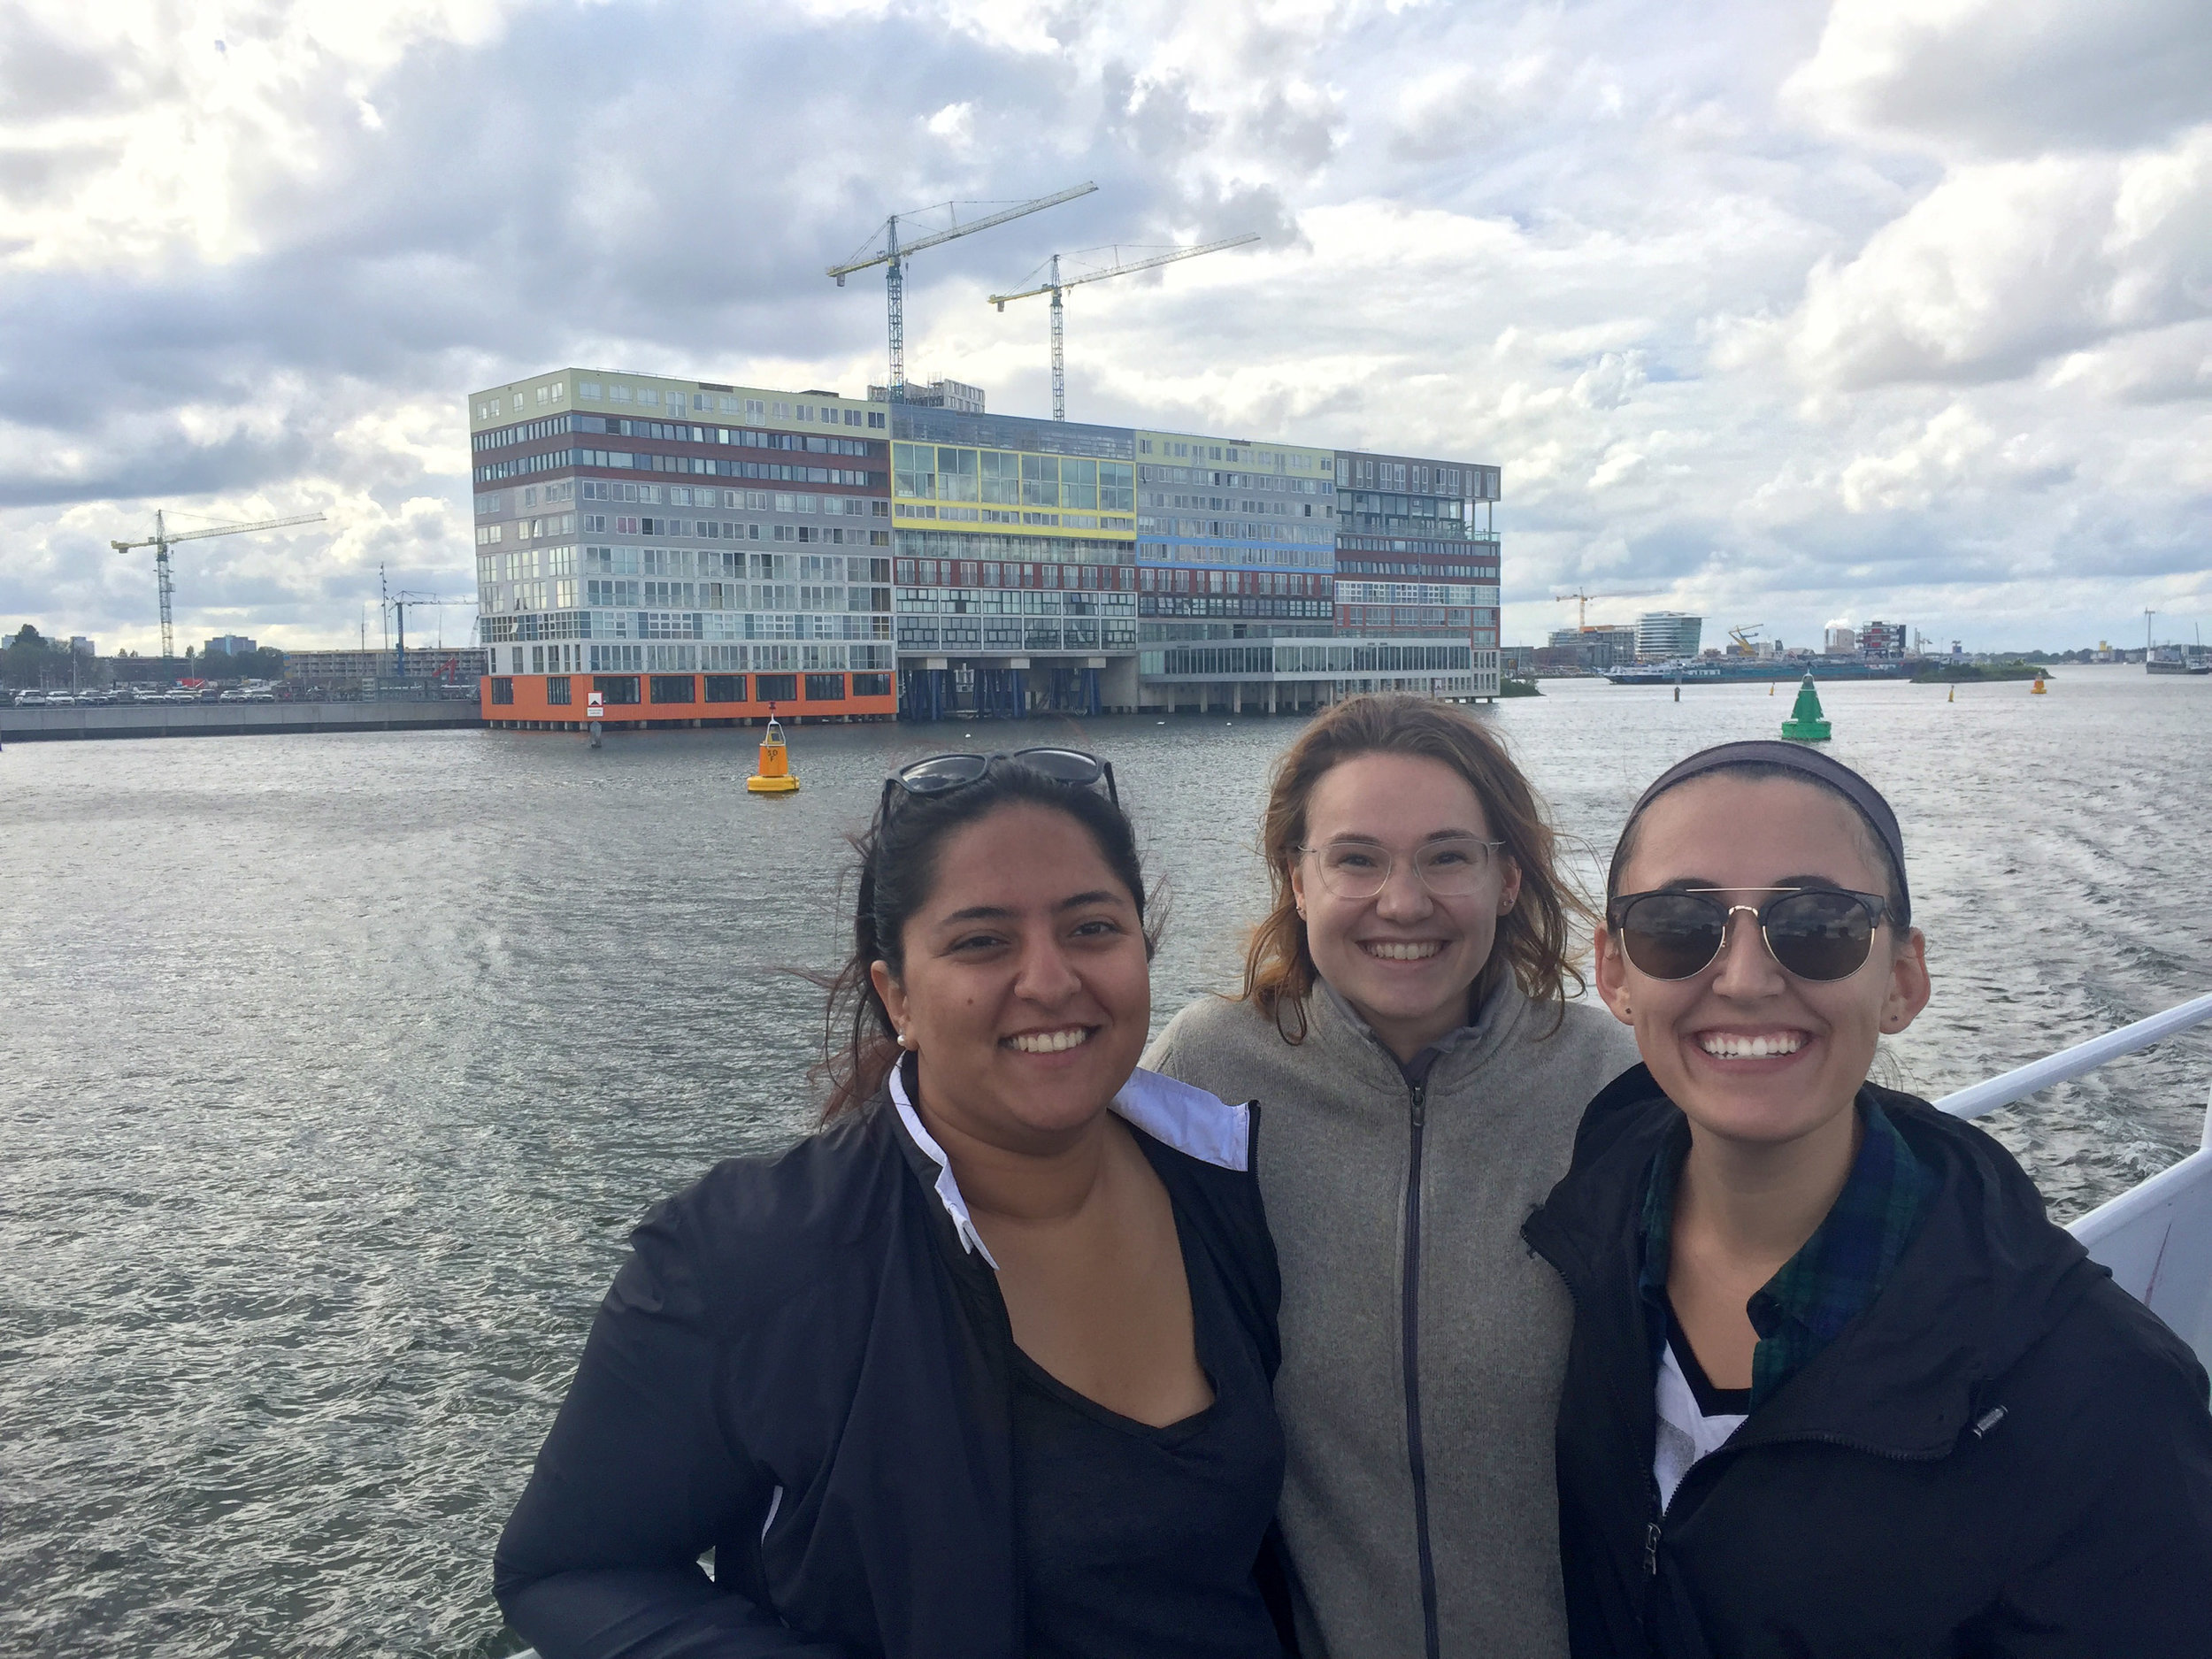  Our day then ended with a boat tour around the IJ. This is me and two of my friends in from of MVRDV’s Silodam. 